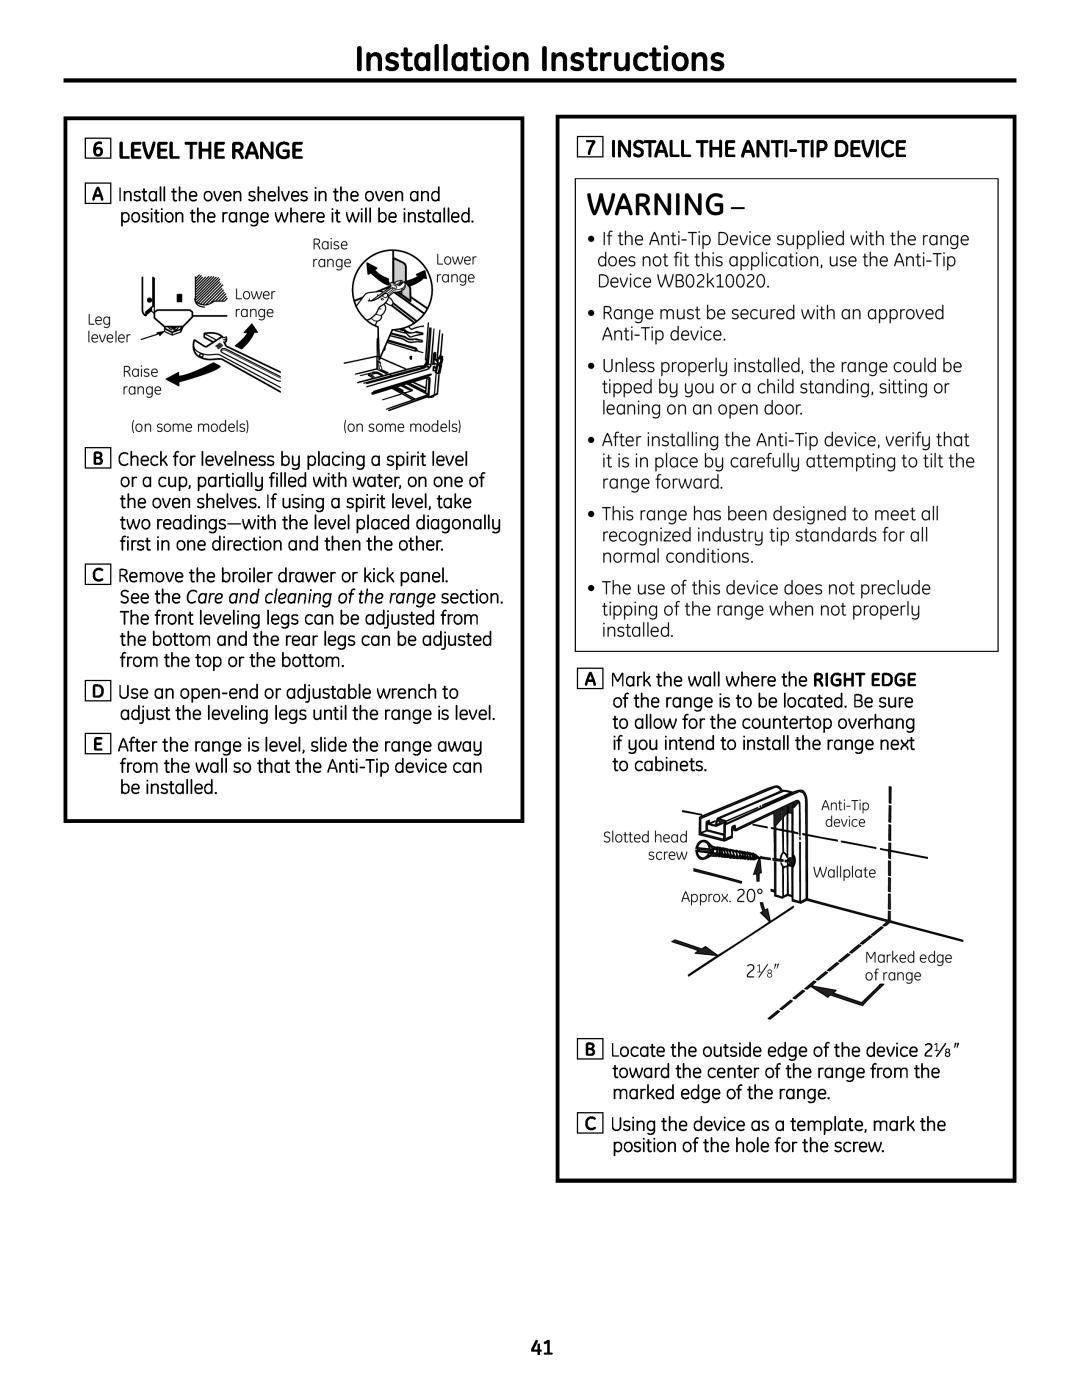 GE JGBS19 installation instructions Level The Range, Install The Anti-Tip Device, Installation Instructions 